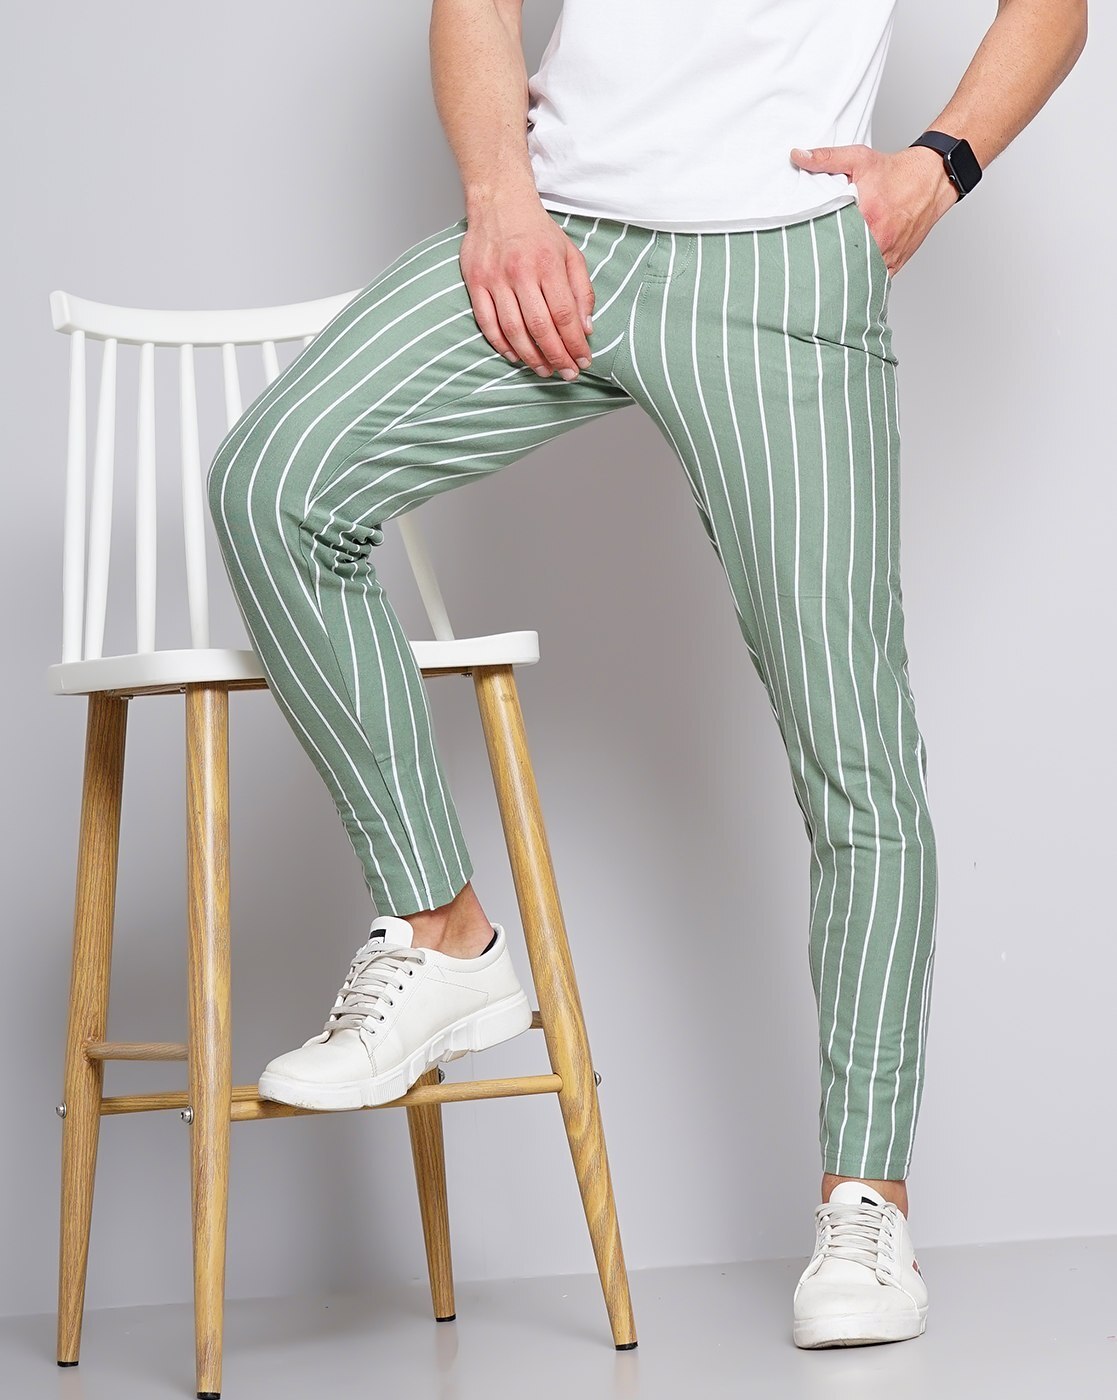 Big and Tall | Harbor Bay Stripe Knit Pants | DXL Men's Clothing Store